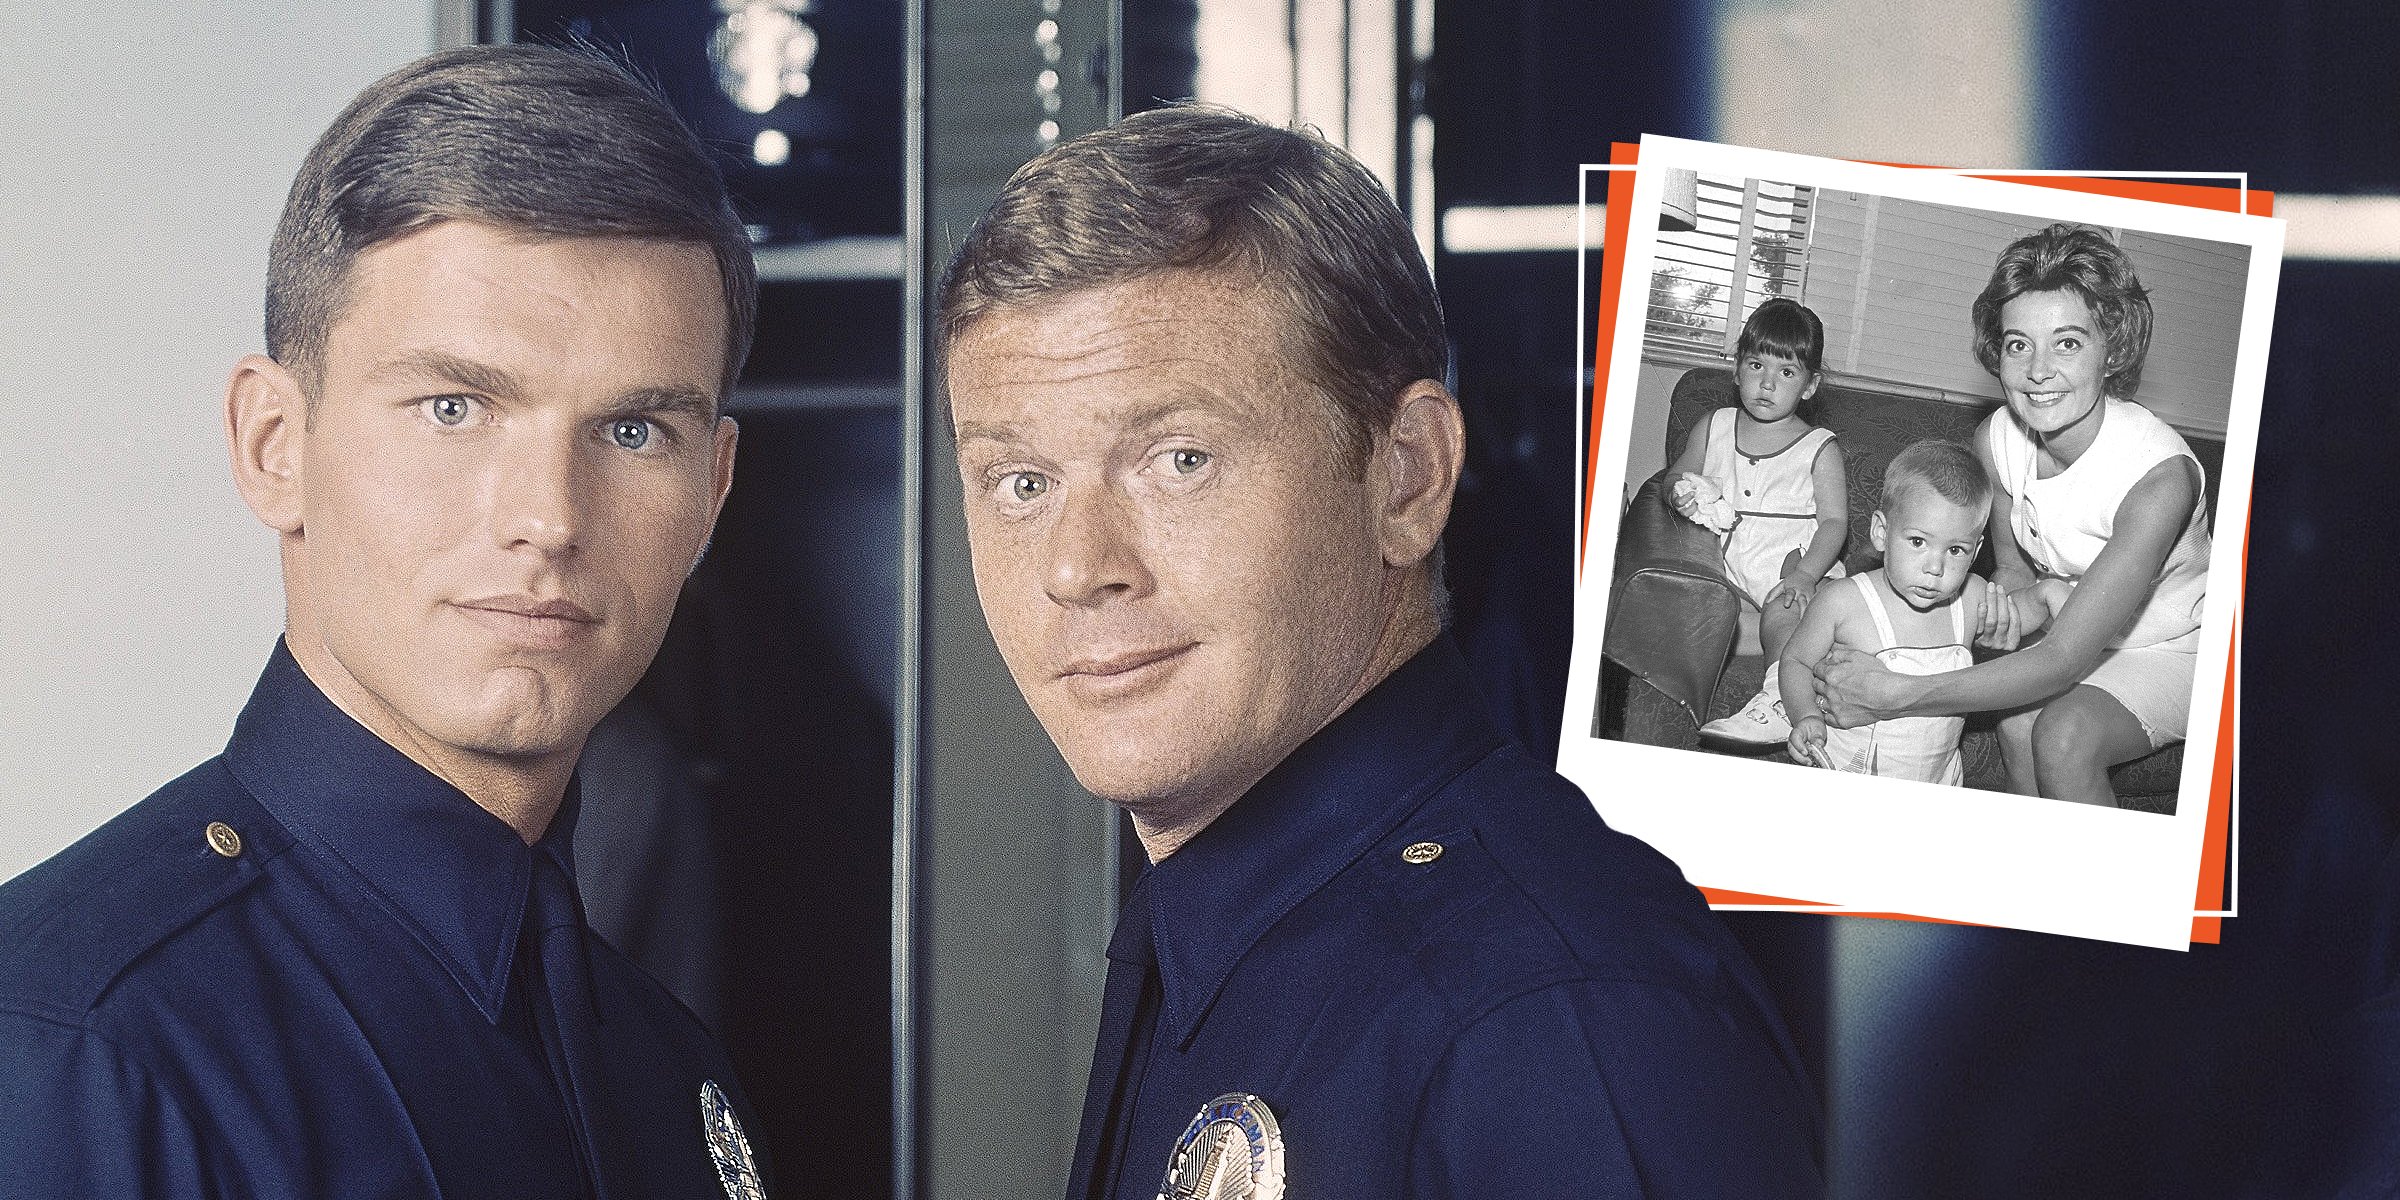 Martin Milner’s Passion Was His Family - His Wife of 58 Years  4 Kids Traveled with Him on ‘Route 66'